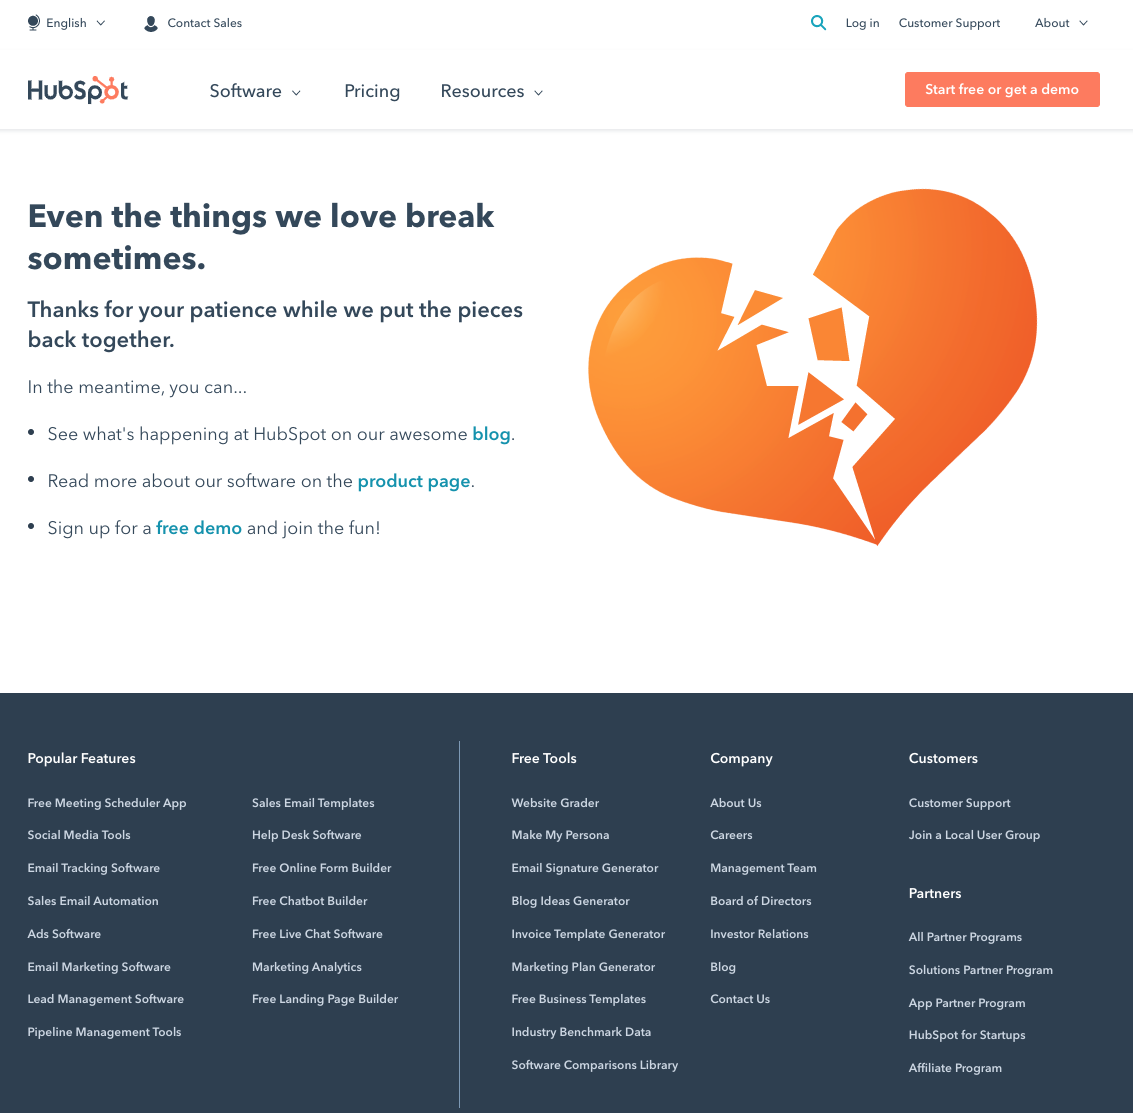 Example of a robust 404 error page from HubSpot. They suggest 3 main links that users may find useful, and the footer provides many other options to help a user navigate.